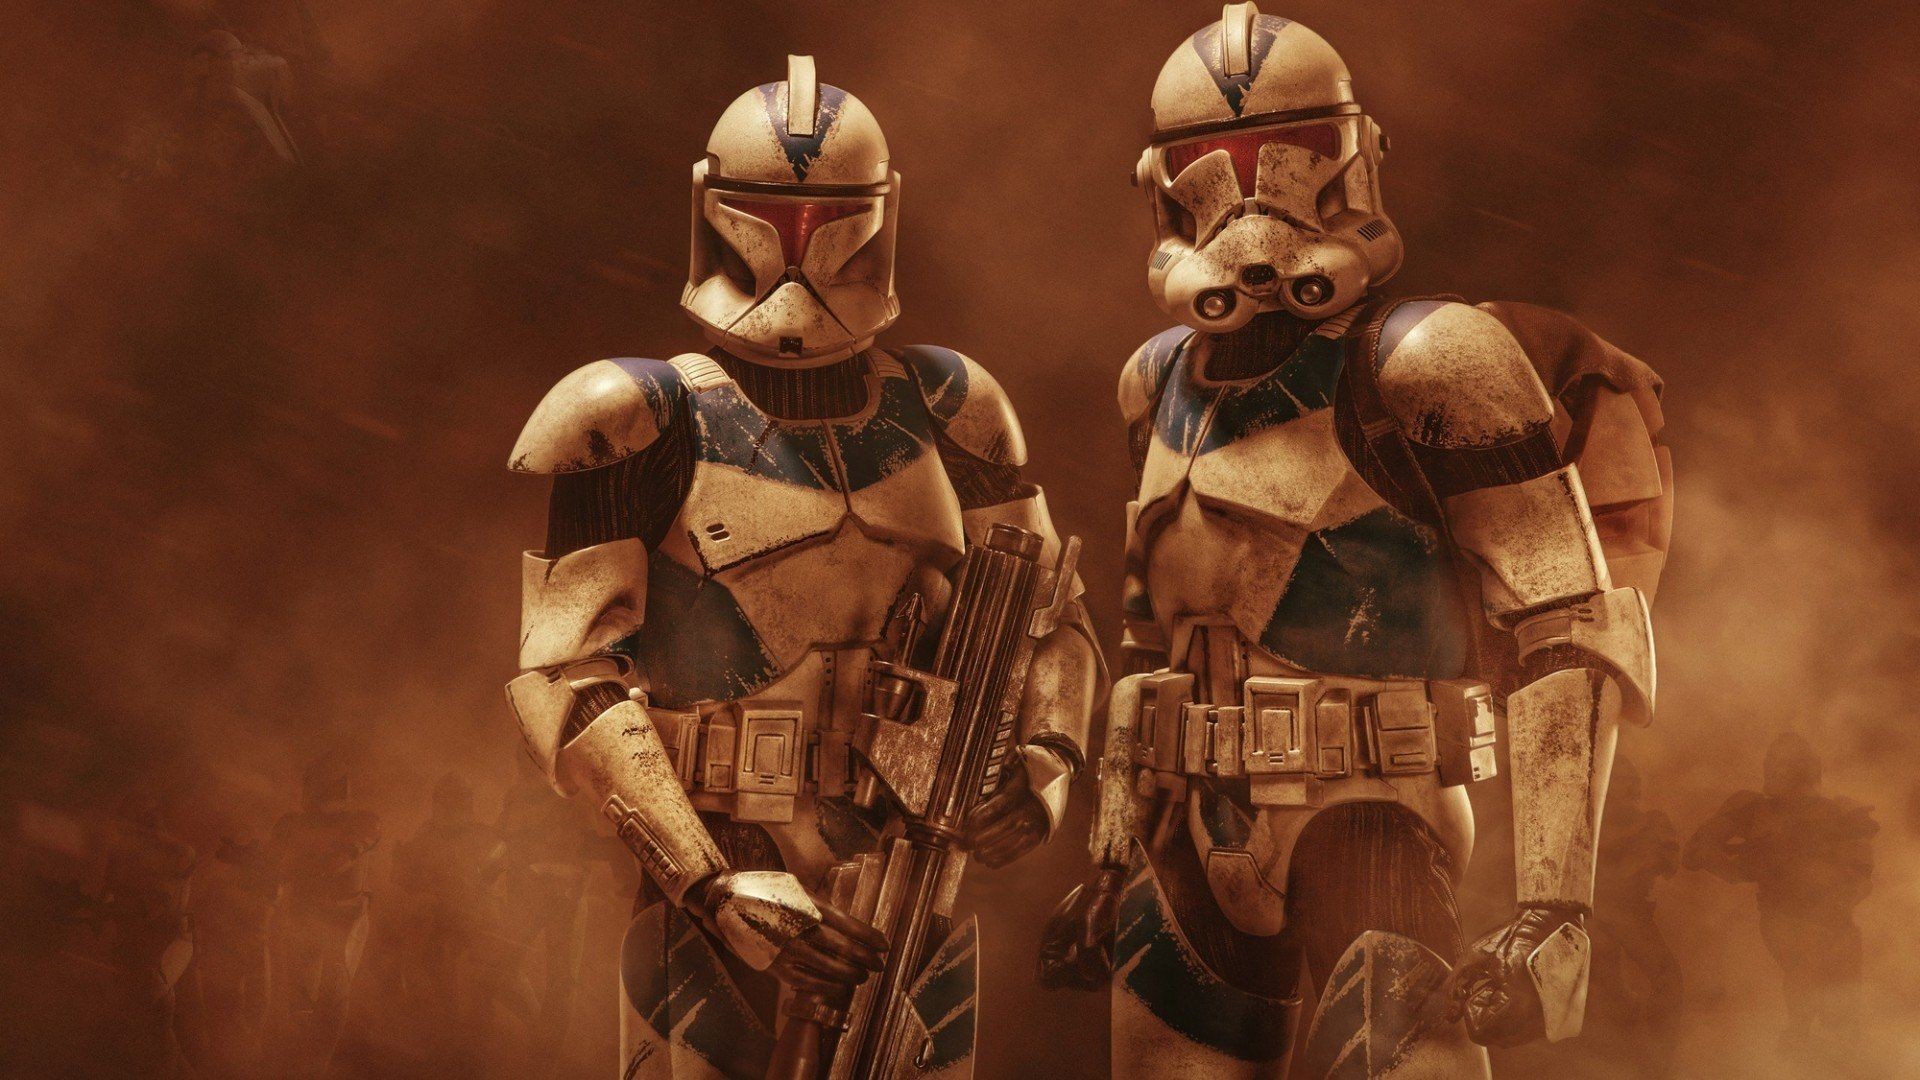 Imperial stormtroopers in Star Wars wallpapers and images